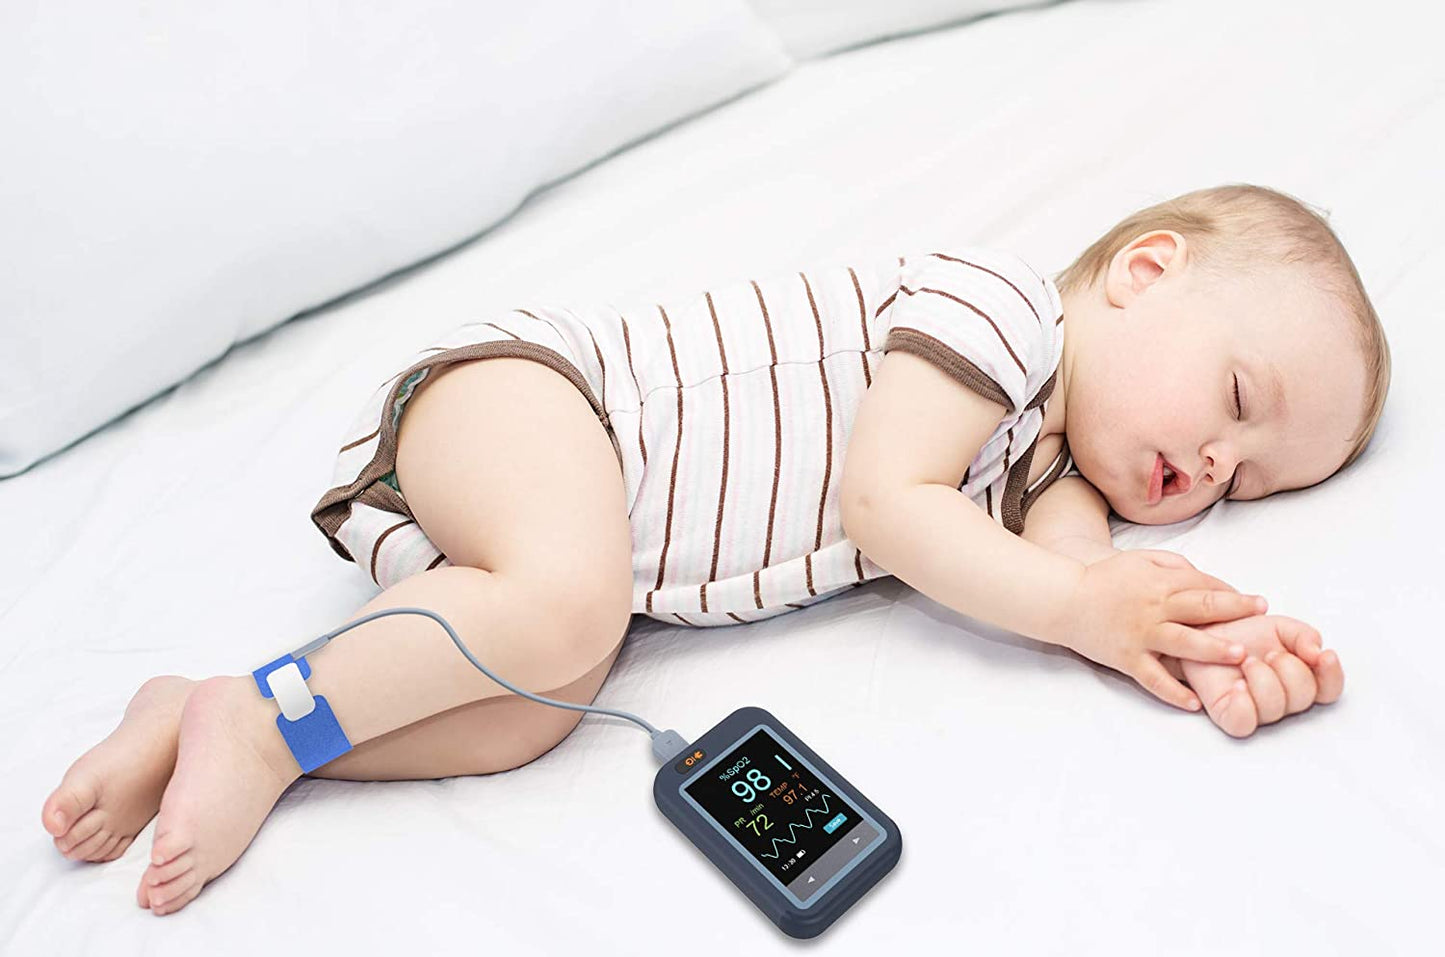 CheckmePod - Smart Handheld Pulse Oximeter for Adults and Infant